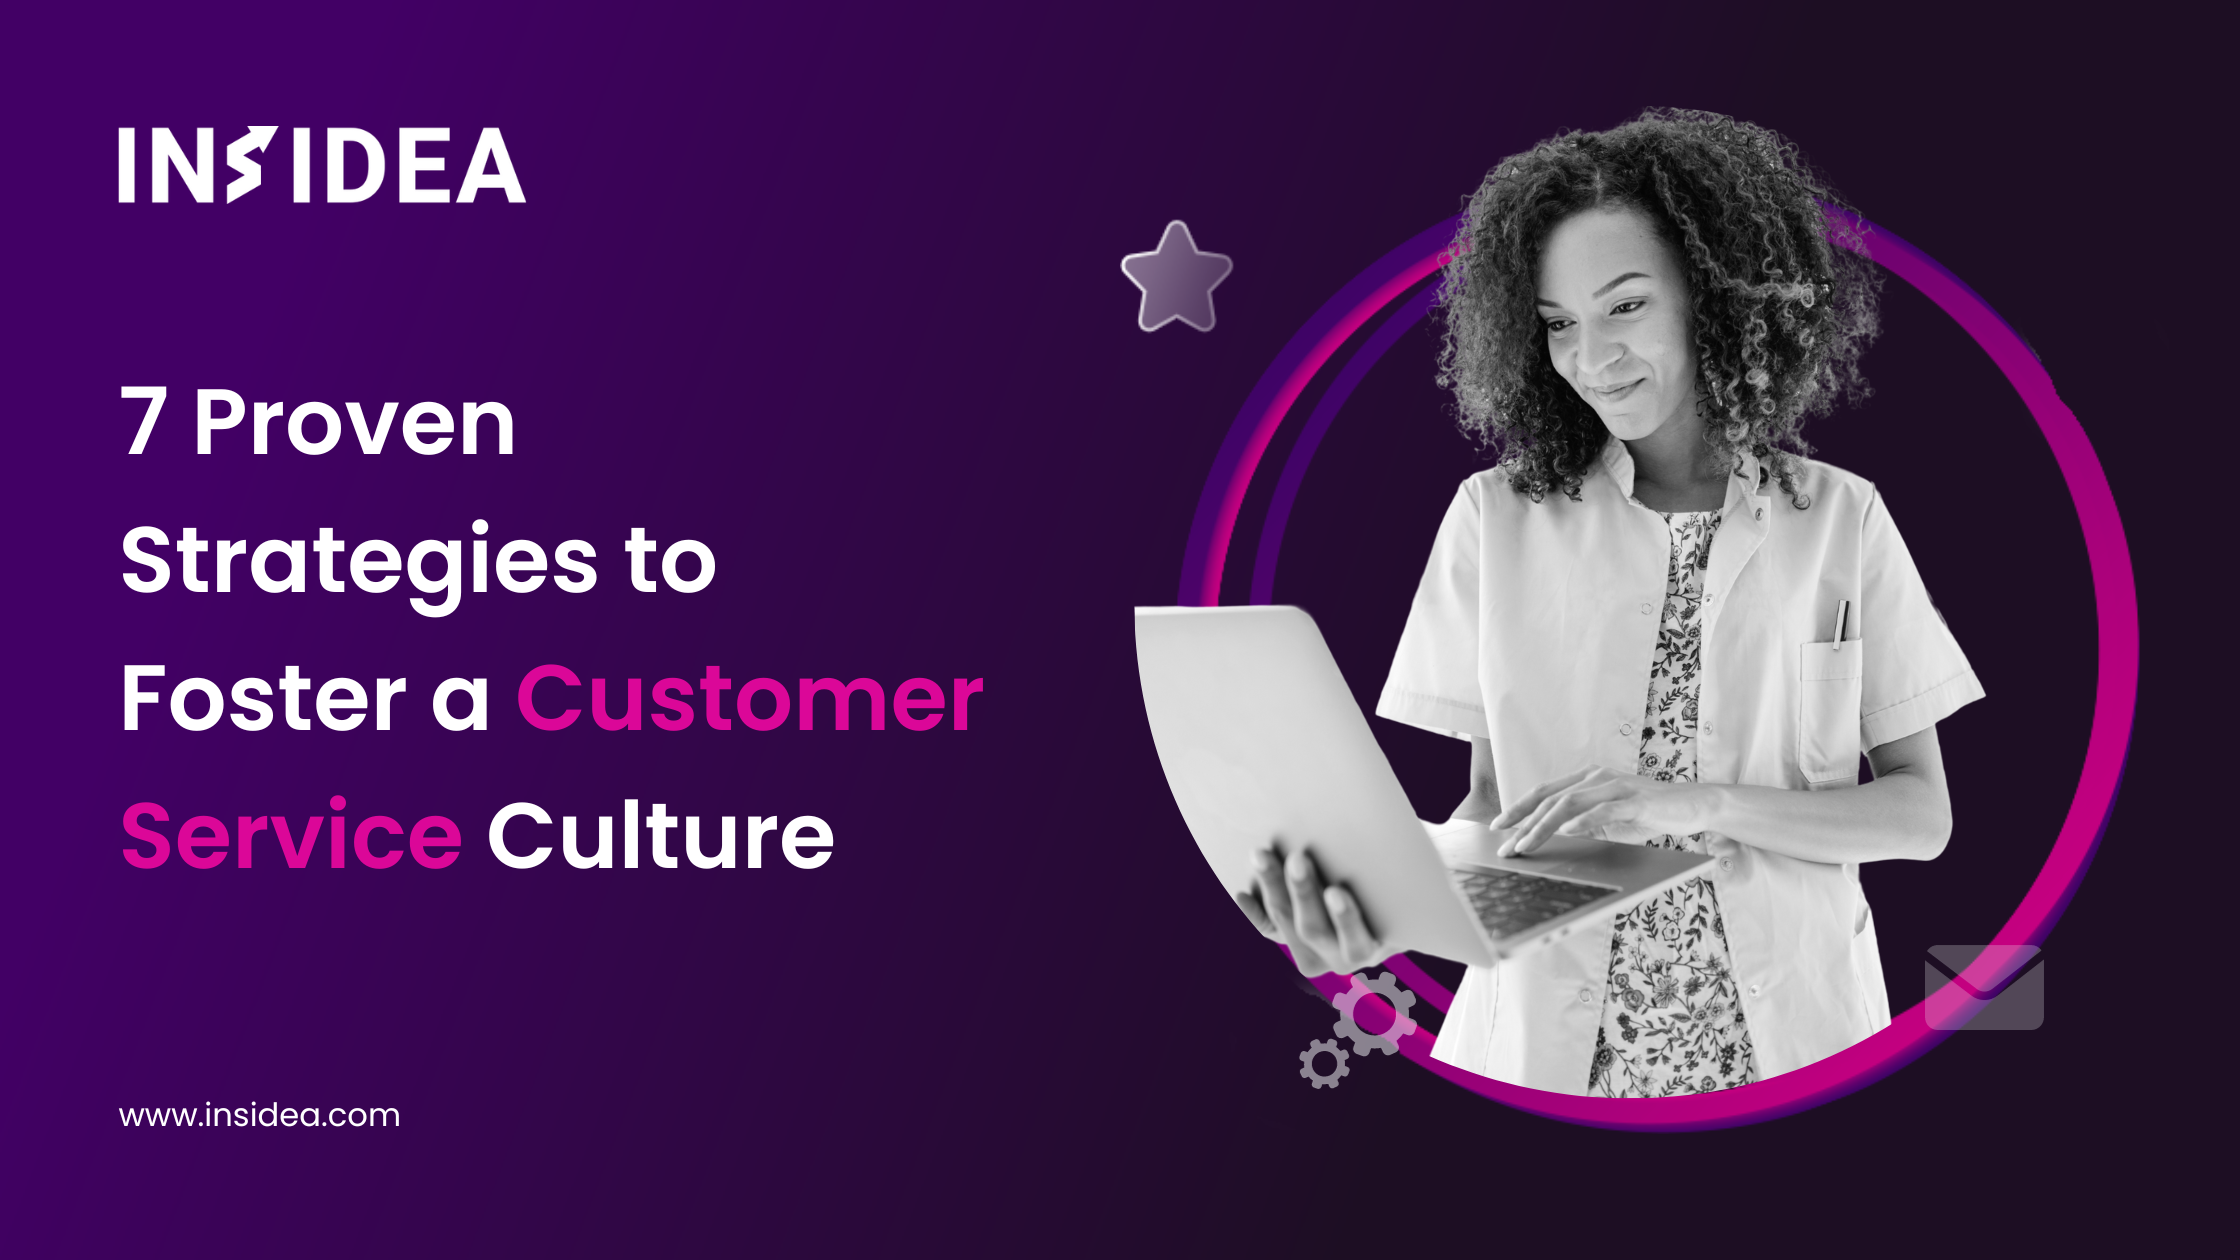 7 Proven Strategies to Foster a Customer Service Culture